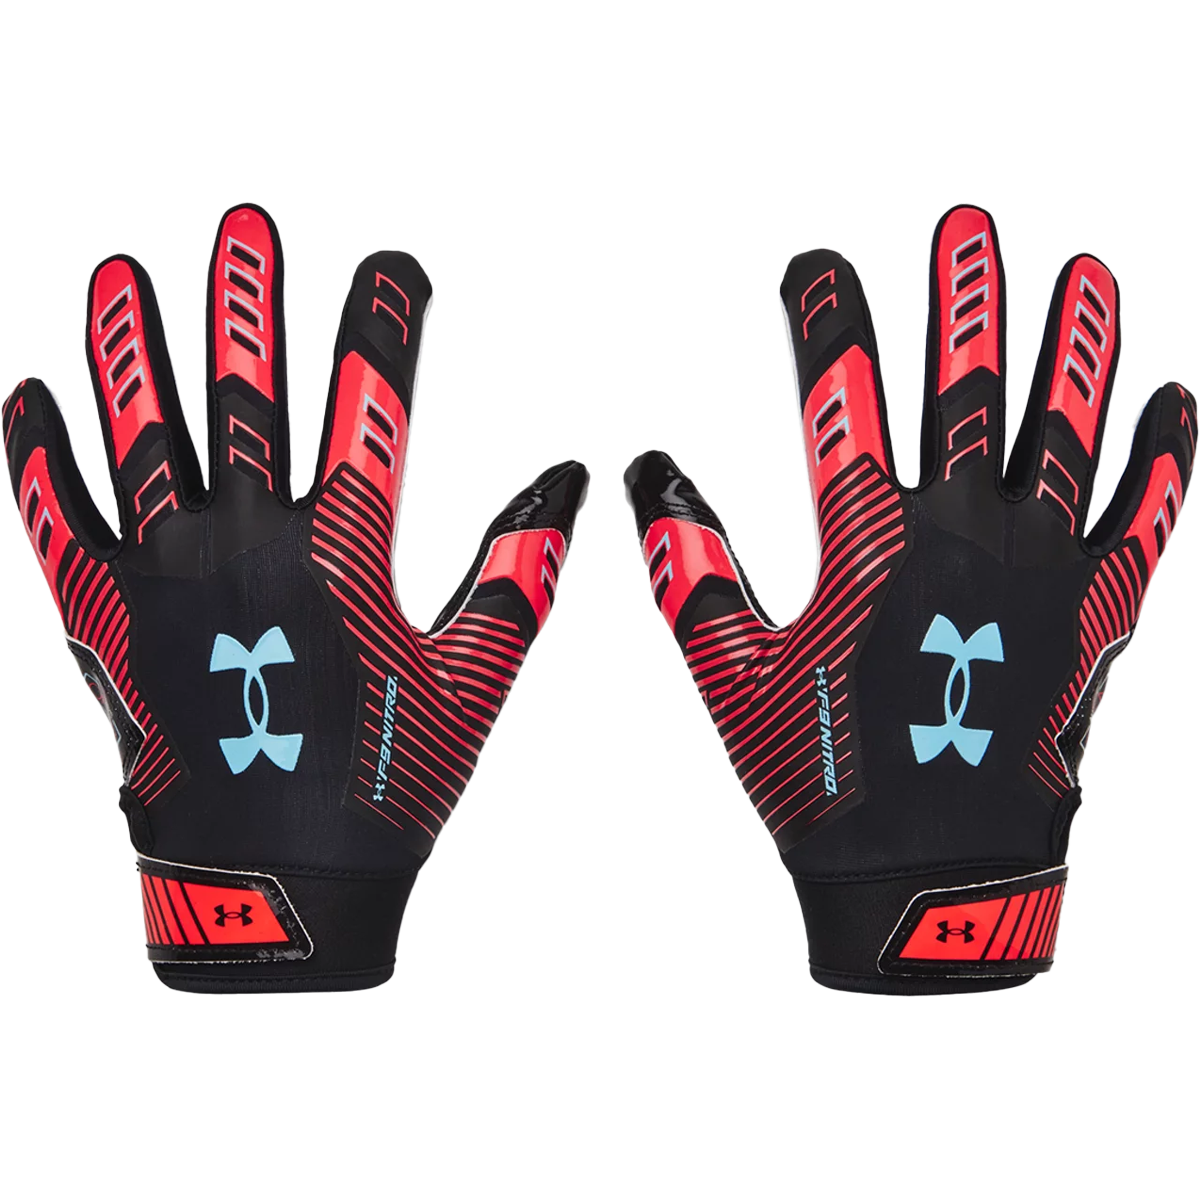 Youth F9 Nitro Printed Football Gloves alternate view